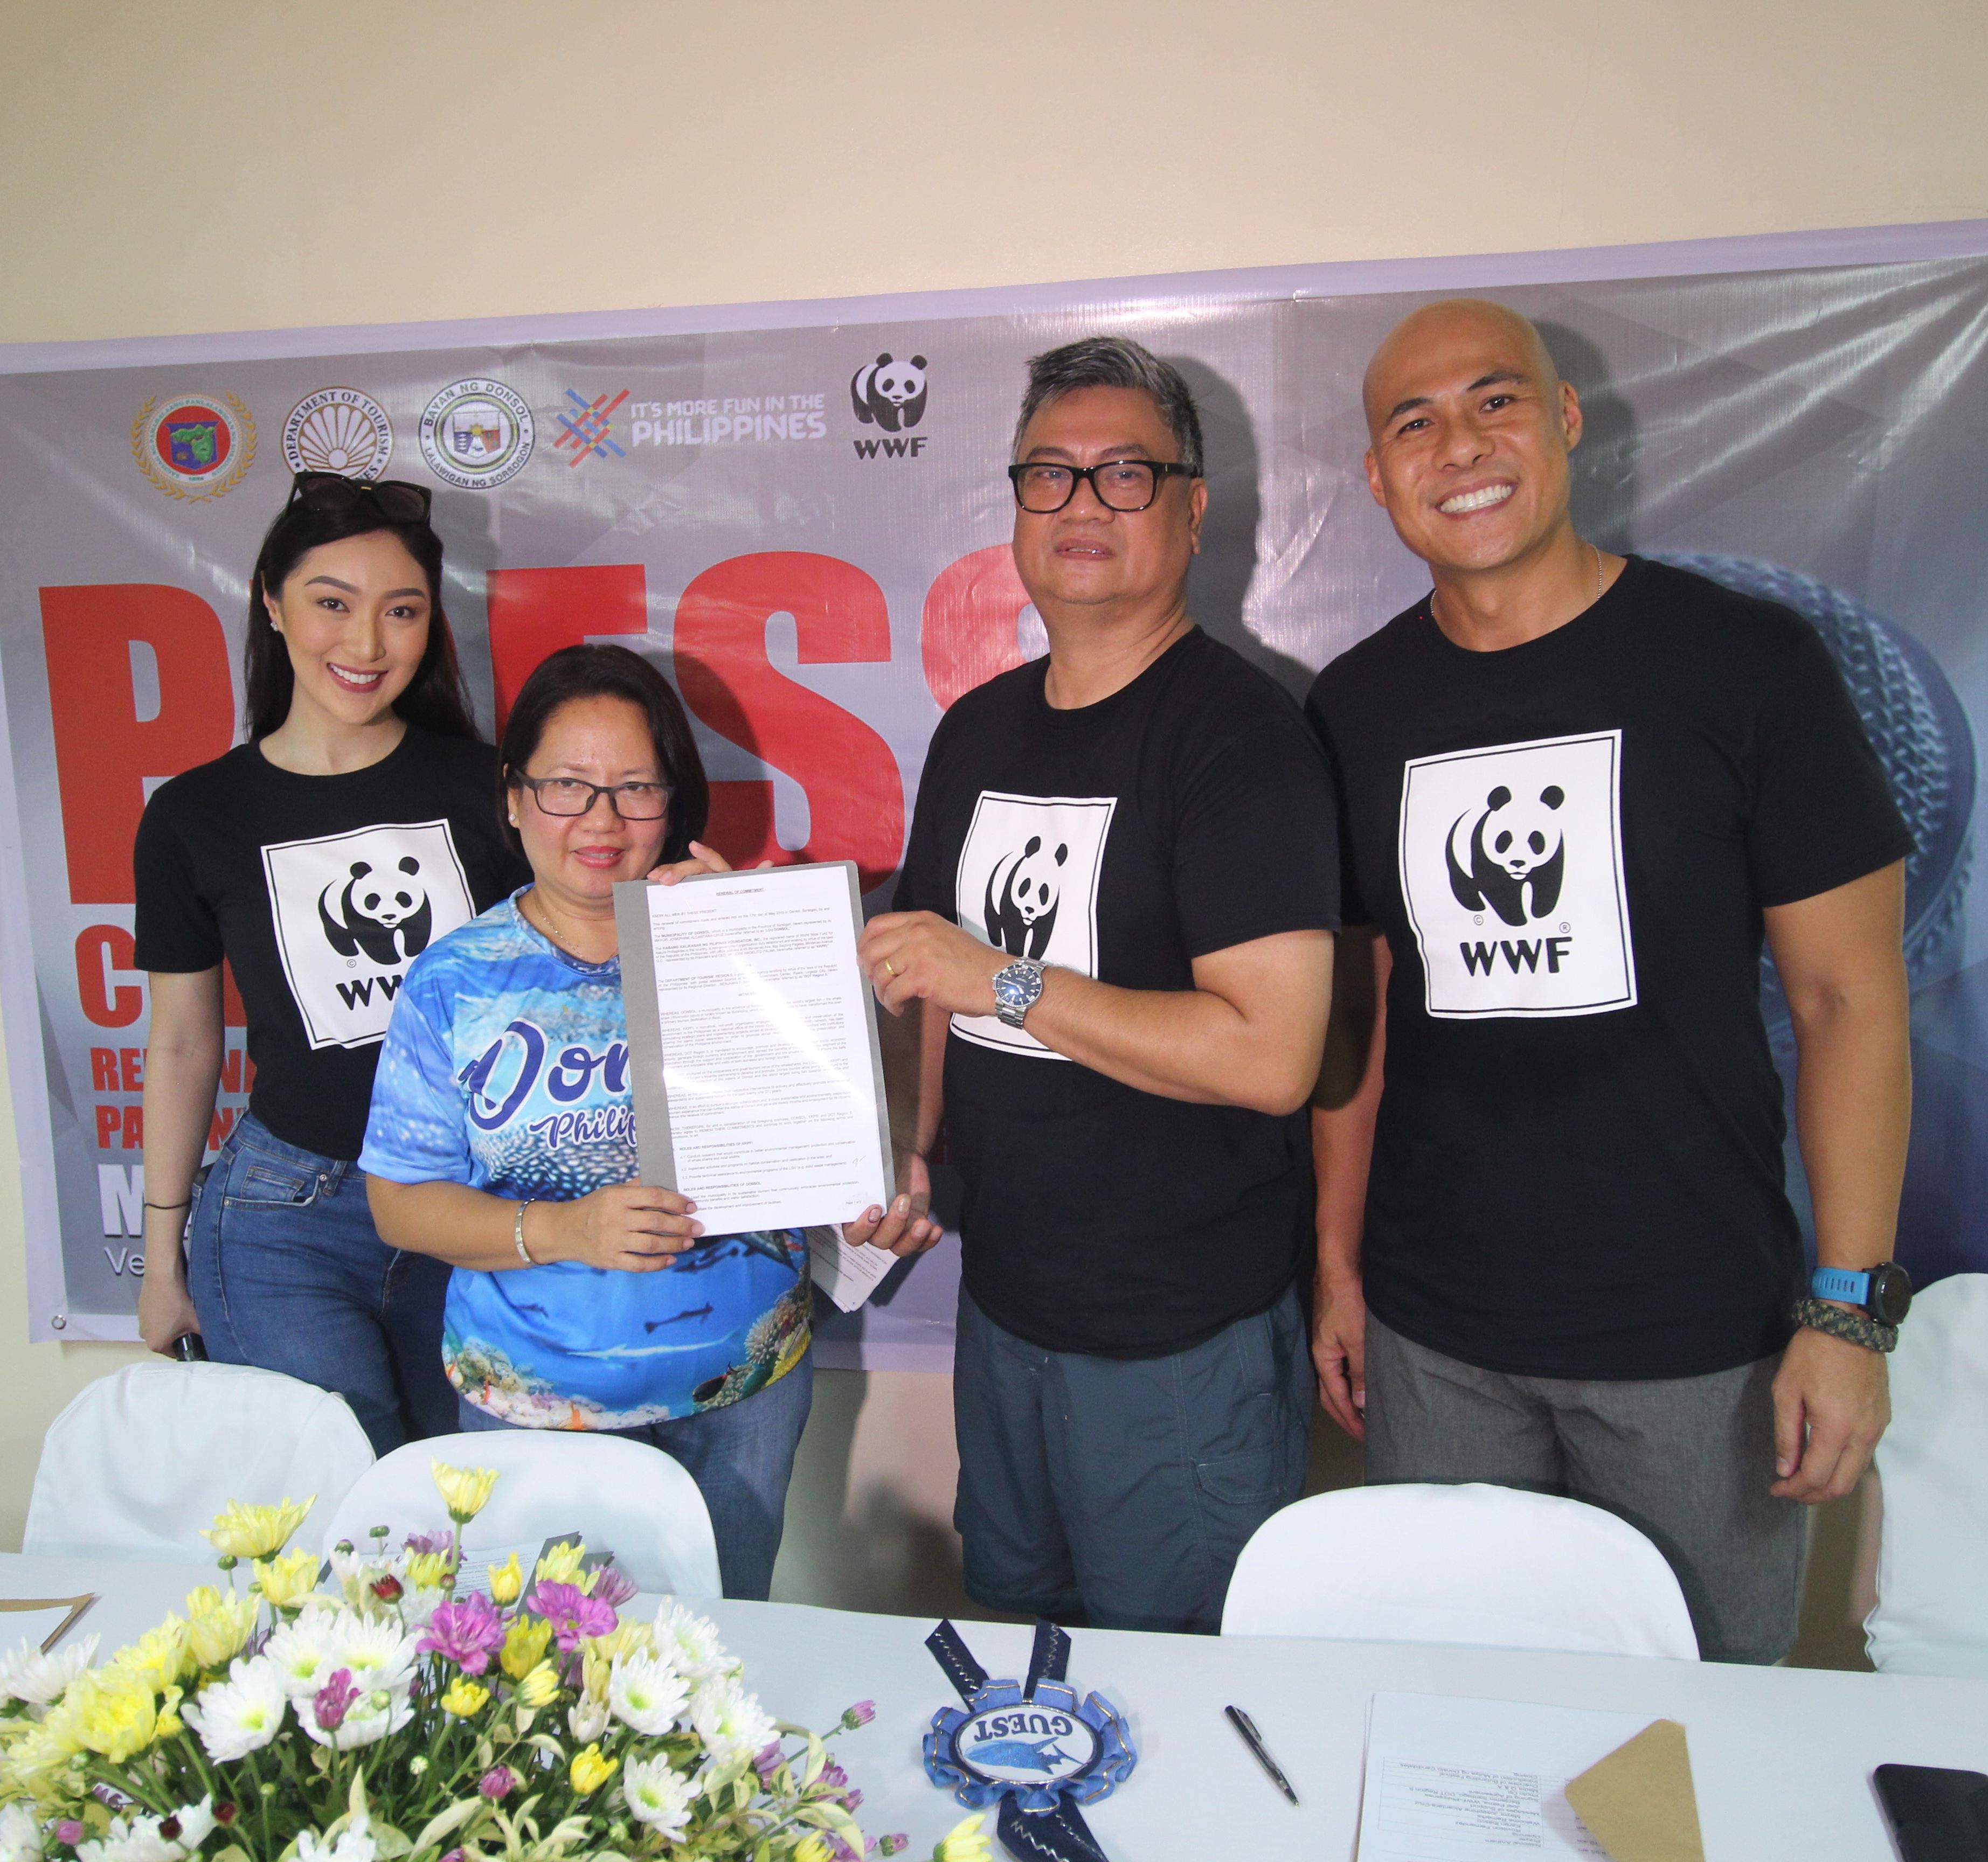 <h1>Donsol Remains Committed to Whale Shark Conservation</h1>
<p>As part of the kickoff of the annual Butanding Festival, the Local Government Unit (LGU) of Donsol, the Department of Tourism Region 5, and the World Wide Fund for Nature (WWF) Philippines renewed their joint commitment to sustainable tourism and the conservation of whale sharks.</p>
<p style="text-align: right;"><a href="https://support.wwf.org.ph/resource-center/story-archives-2019/whale-shark-commitment-renewal/" target="_blank">Read More &gt;</a></p>